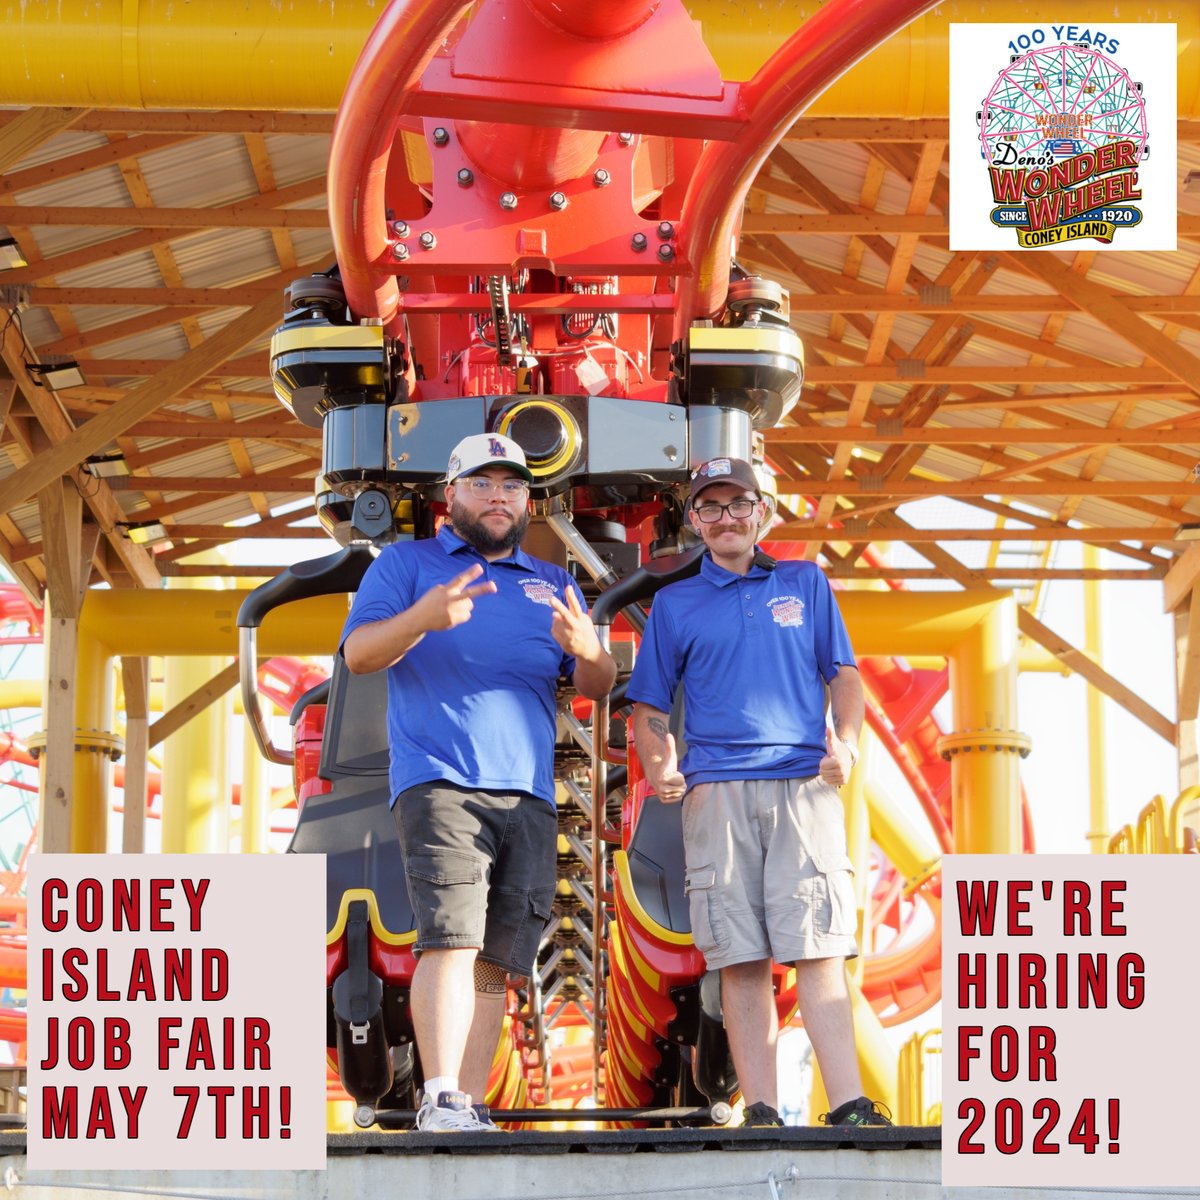 We're in the business of fun! Want to work in Coney Island at Deno's Wonder Wheel Park in food services or ride operations? Must be 18 or older. $16-$17/hr. Coney Island Job Fair on May 7 at @ConeyAmp, 3052 W 21 St, 10AM - 2PM. Info: calendly.com/coneywf1/coney… #JobAlert #Brooklyn